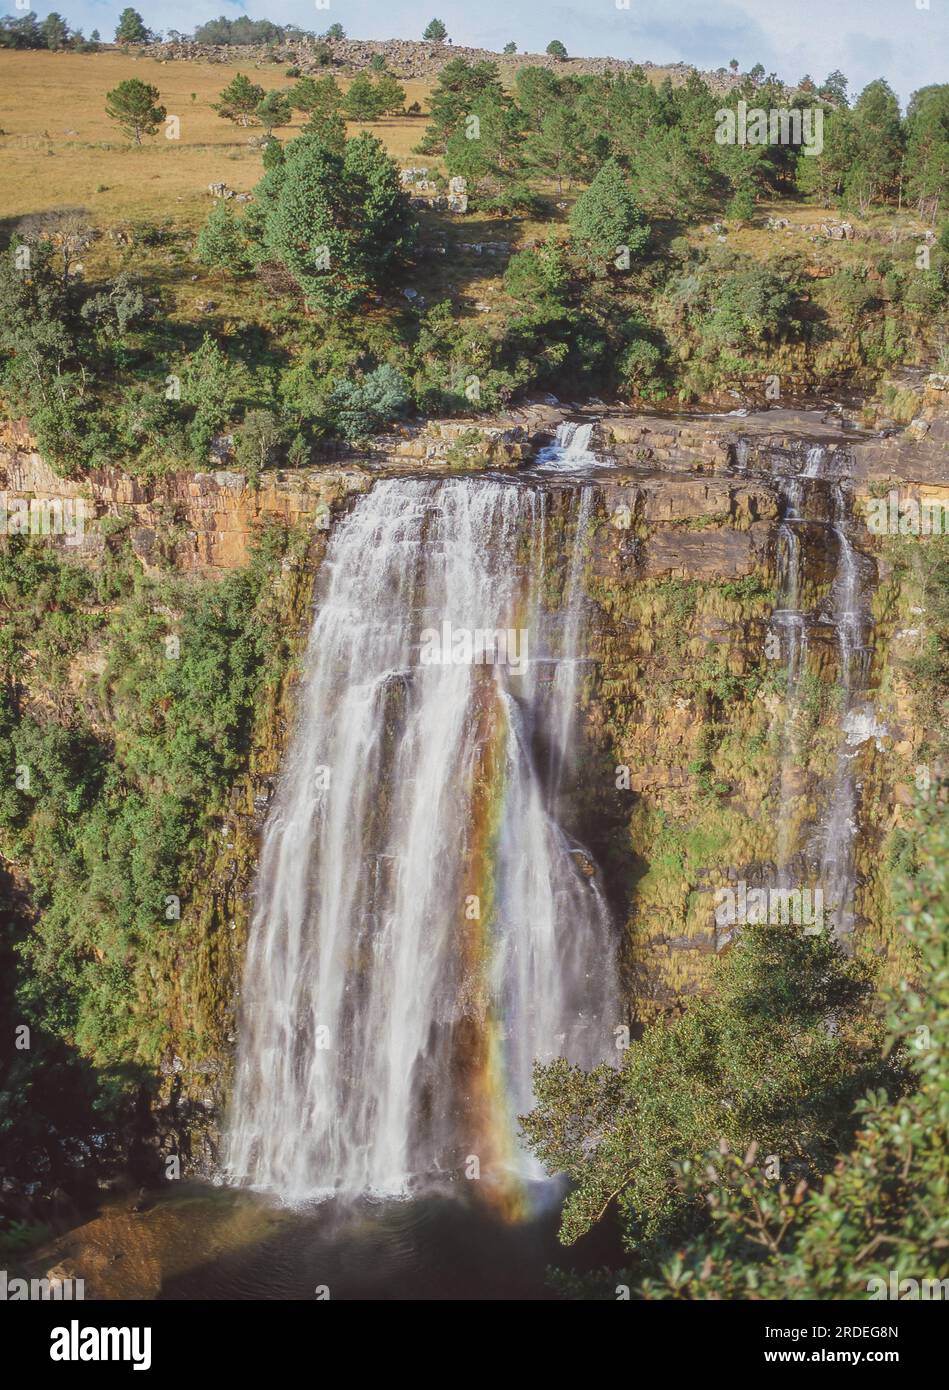 The Lisbon Falls are in Lisbon Creek, a tributary of the Blyde River. They are situated a short distance north of Graskop in Mpumalanga, South Africa. Stock Photo